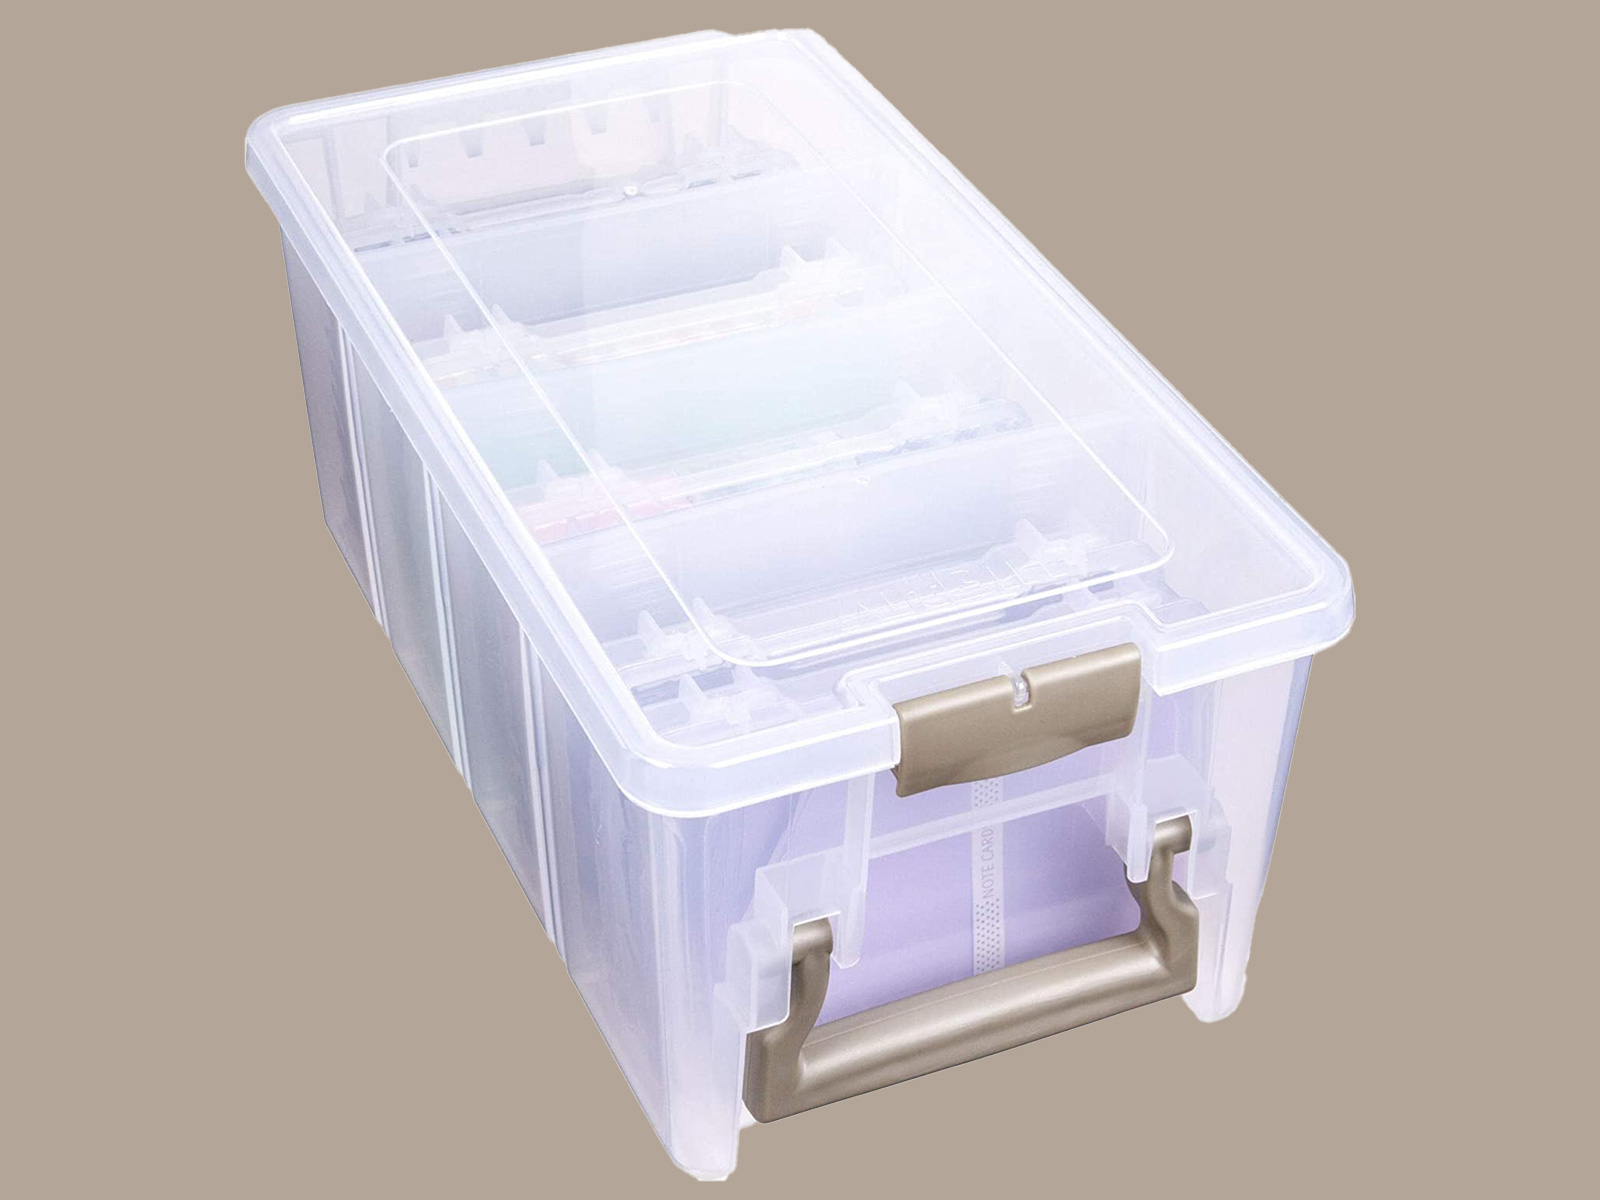 Pen+gear Storage Boxes with Lids - 3 Pack